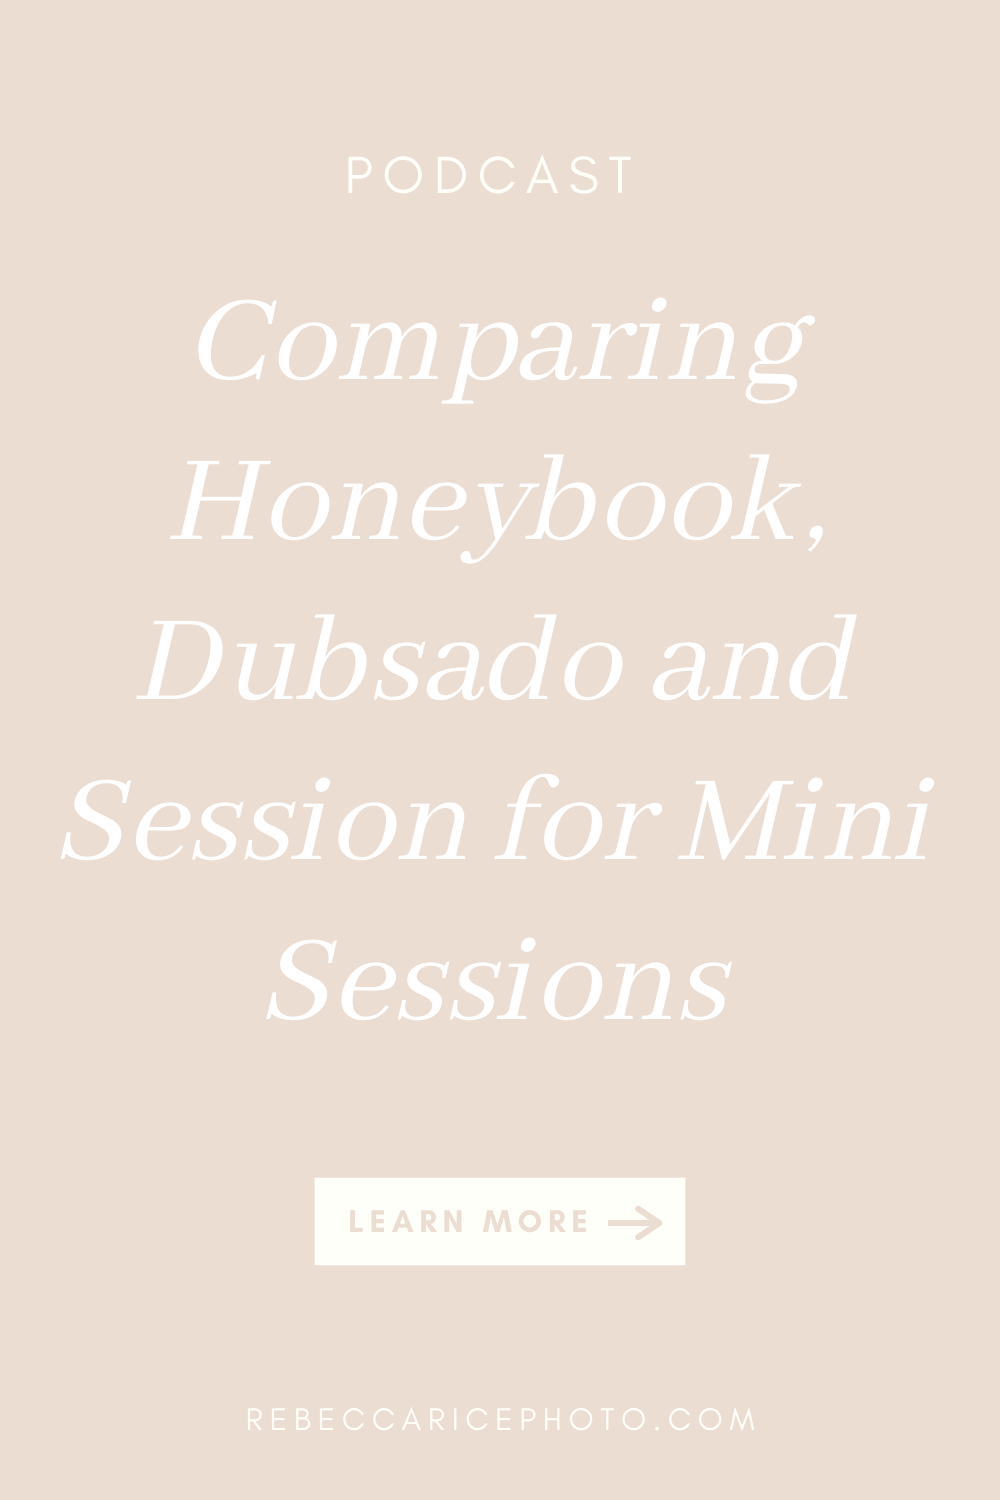 Comparing CRMs for Mini-Sessions: Rebecca Rice Photography compares 3 CRMs, Honeybook, Dubsado and Session for mini-session photographer